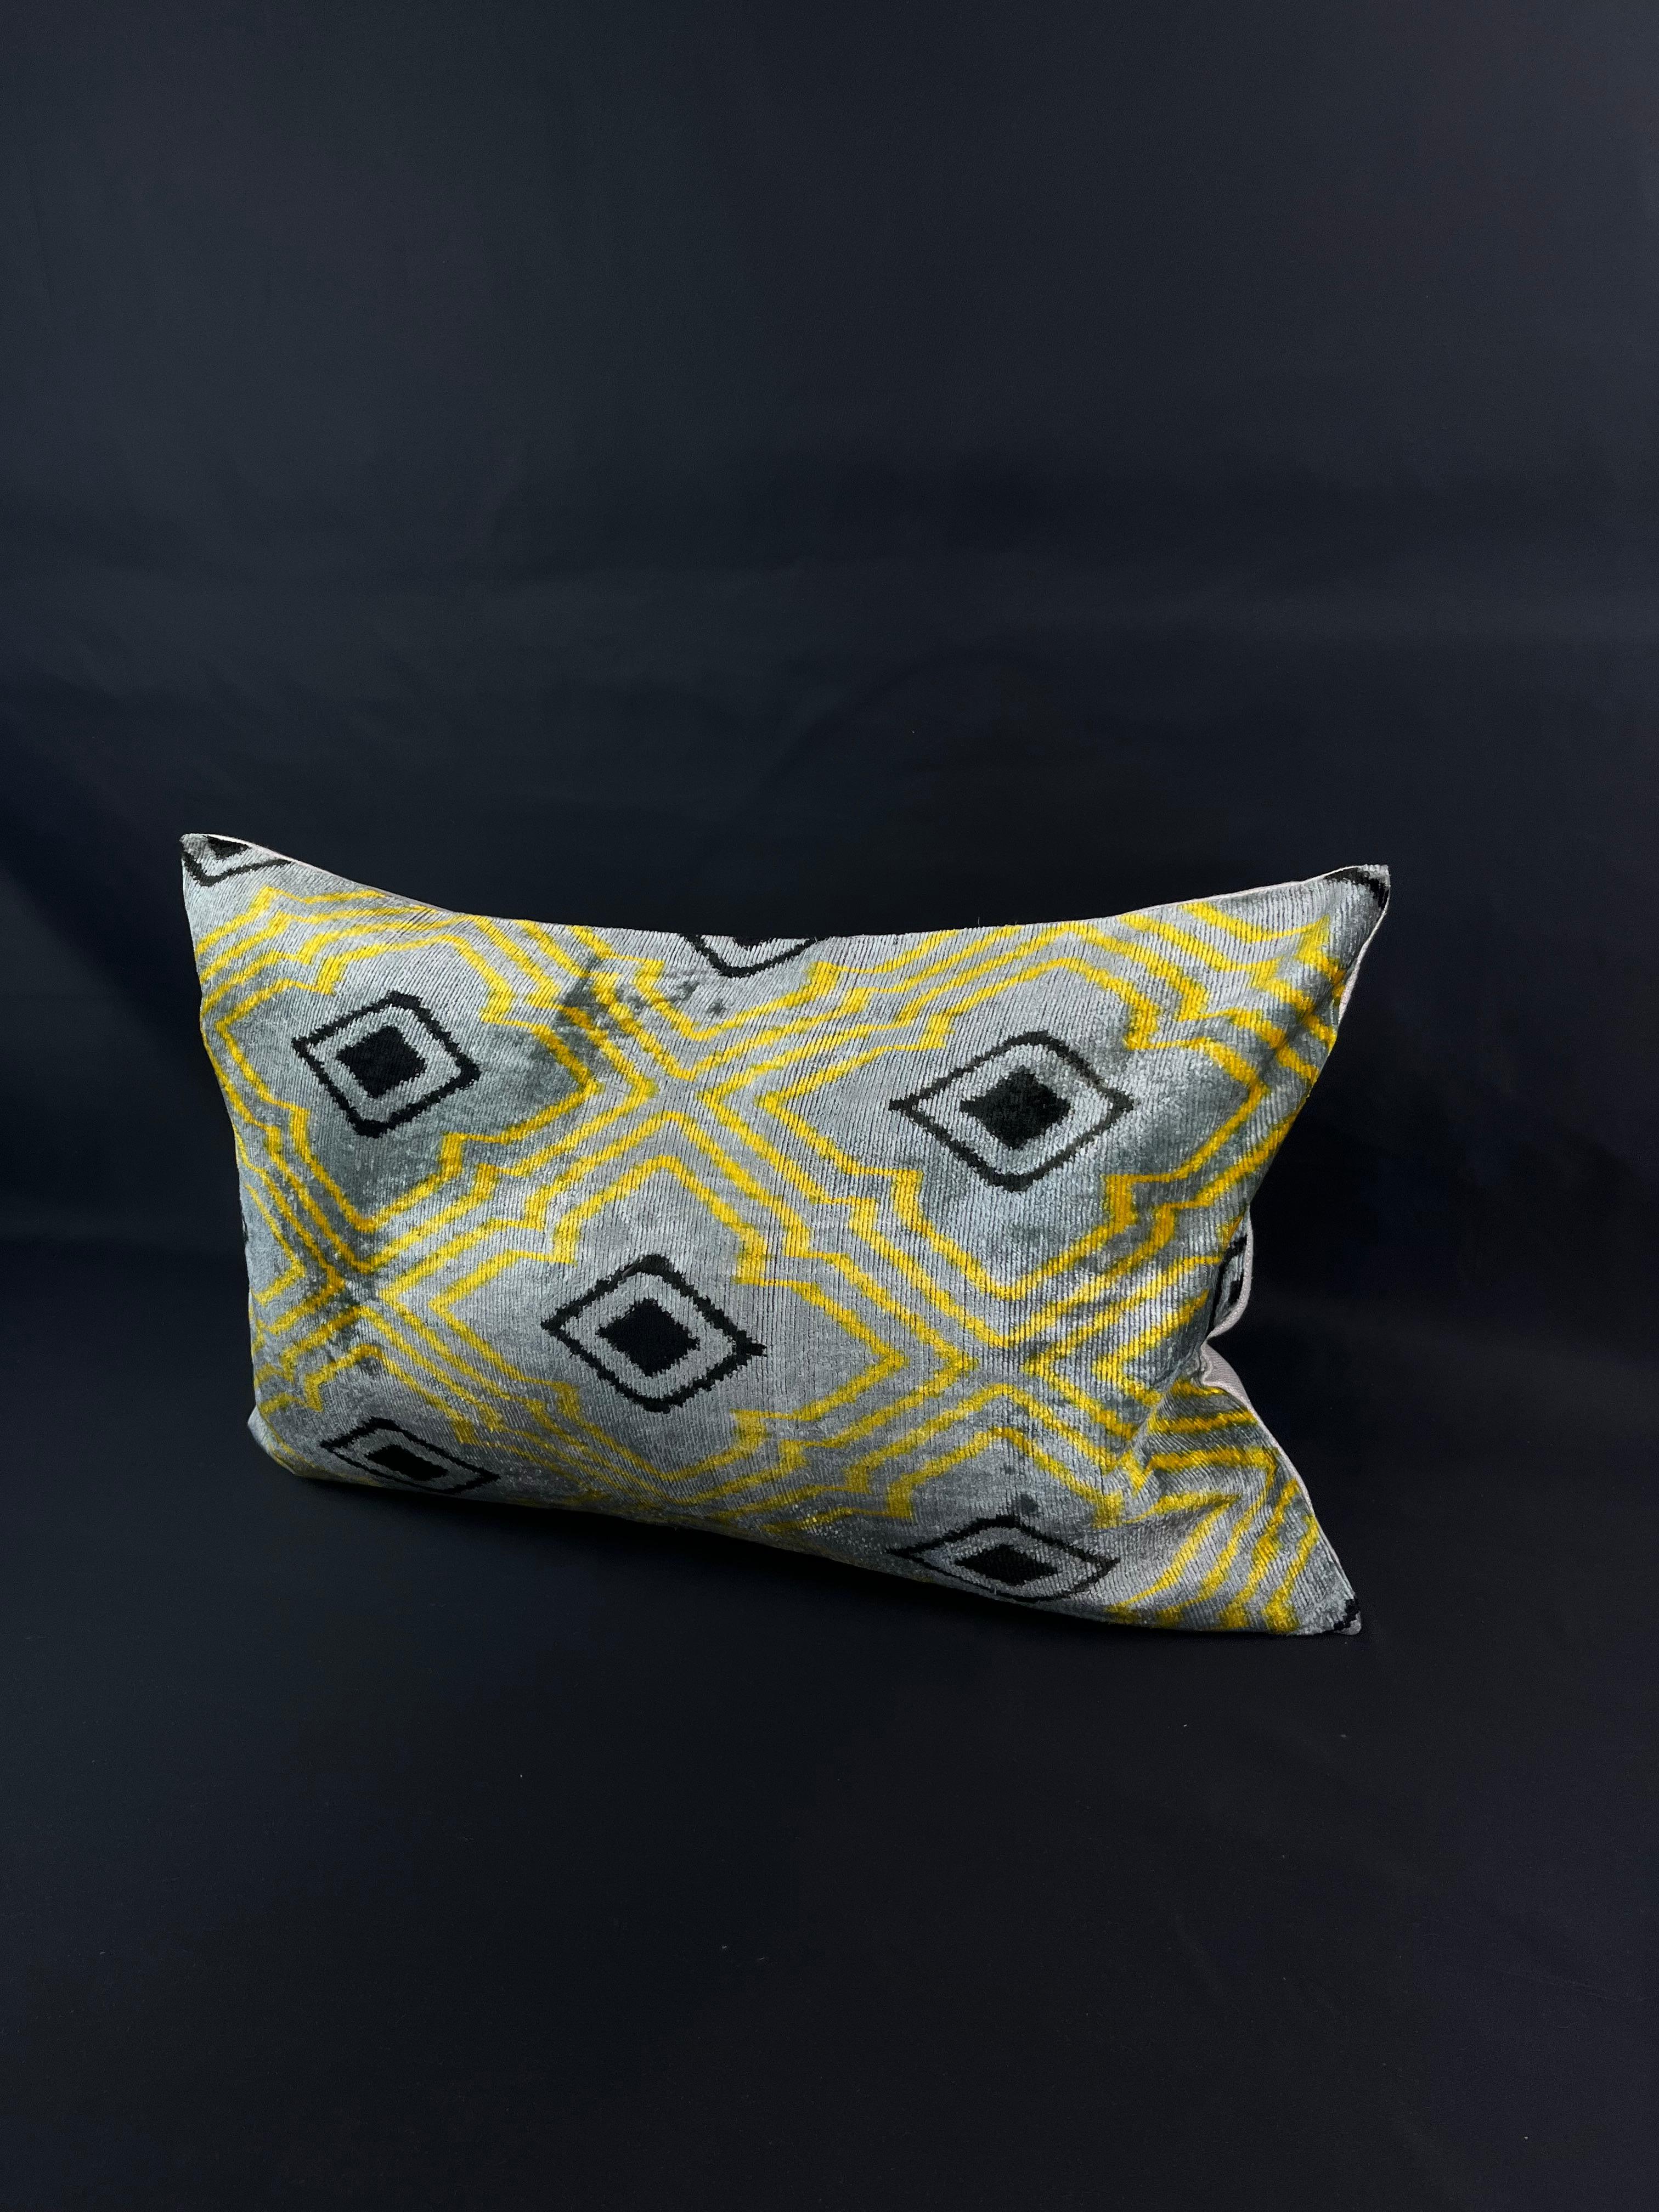 Introducing a stunning Turkish velvet ikat pillowcase, expertly handwoven from the finest silk and adorned with vibrant hand-dyed patterns. This exquisite pillowcase is a true work of art, crafted by skilled artisans using traditional techniques